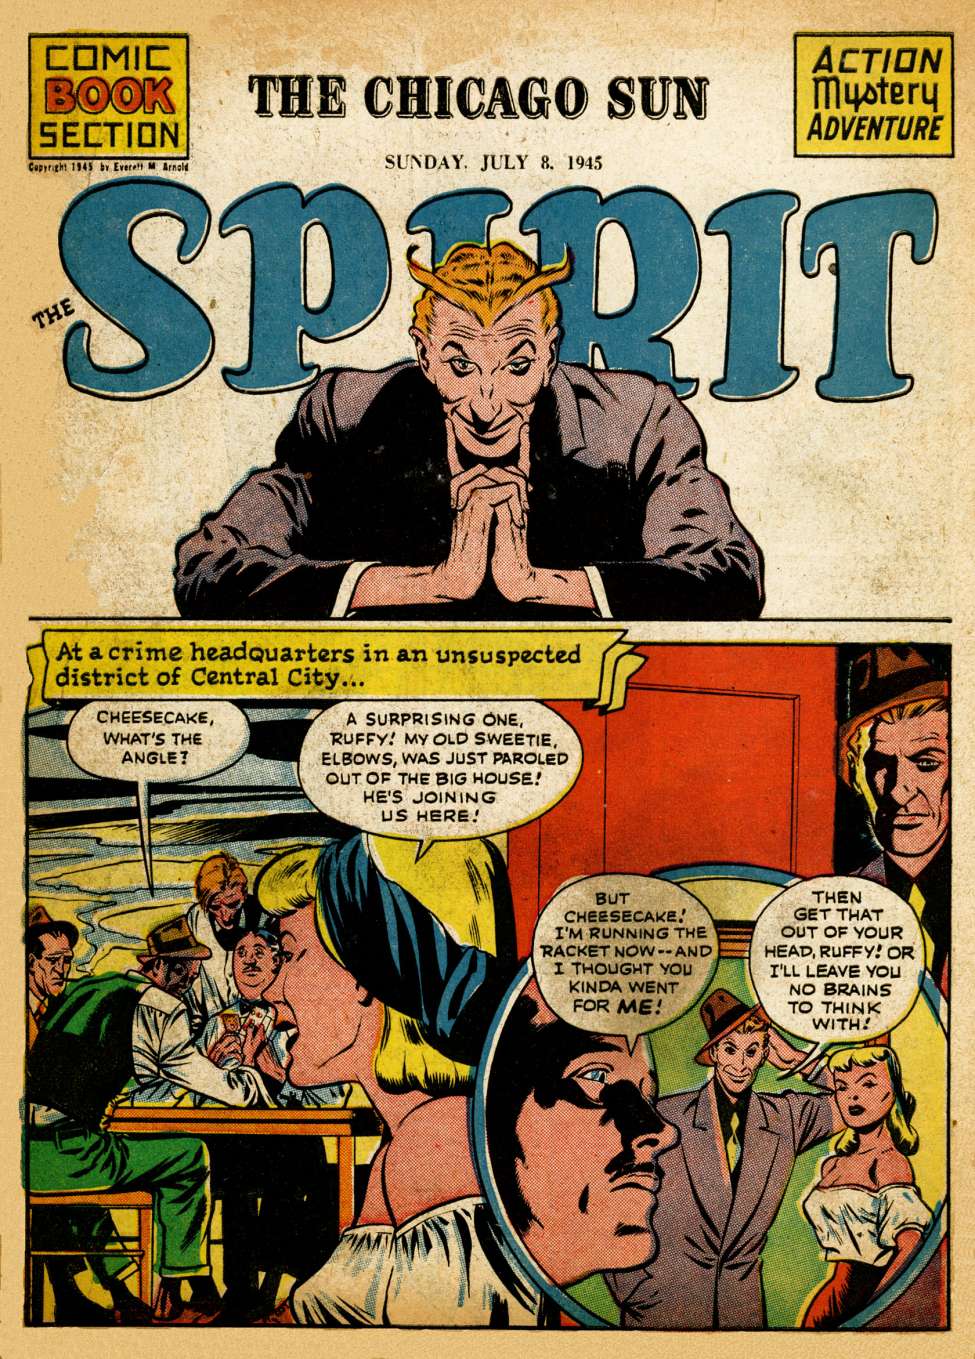 Comic Book Cover For The Spirit (1945-07-08) - Chicago Sun